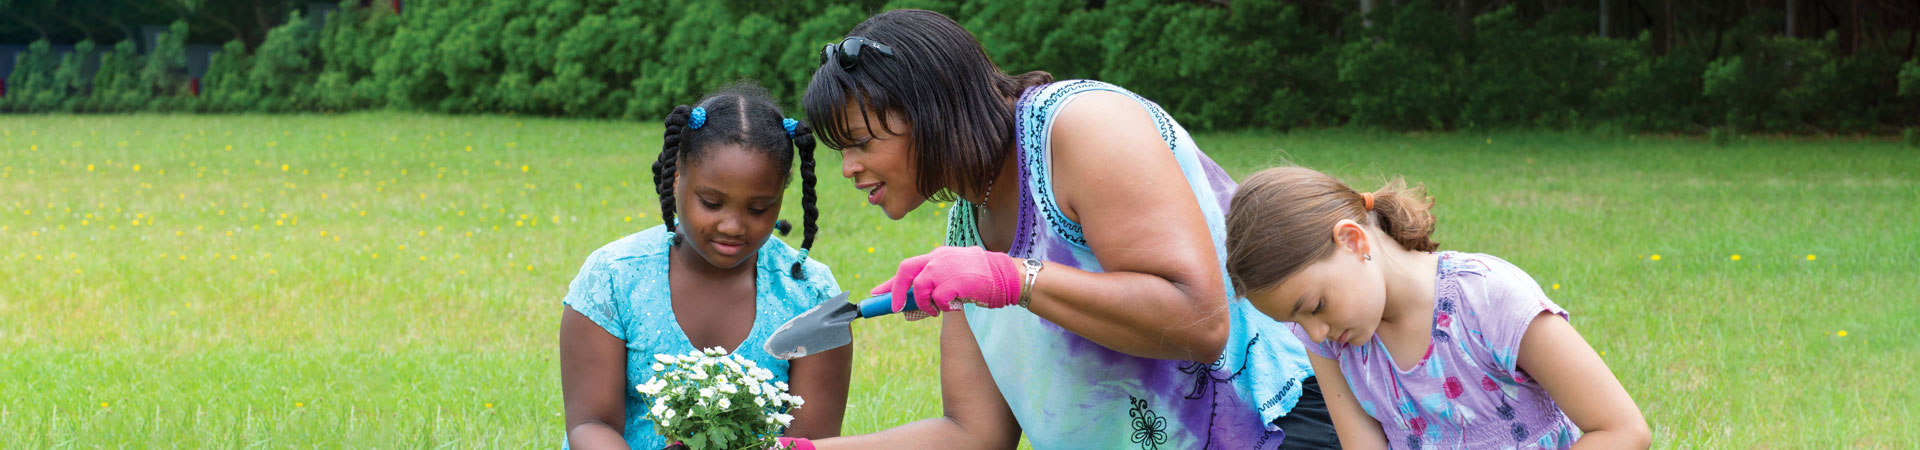  An adult volunteer and two youth Girl Scouts are sitting in the grass potting flowers. One of the youth Girl Scouts is holding a pot with white and green flowers. The adult volunteer is holding a small shovel.  